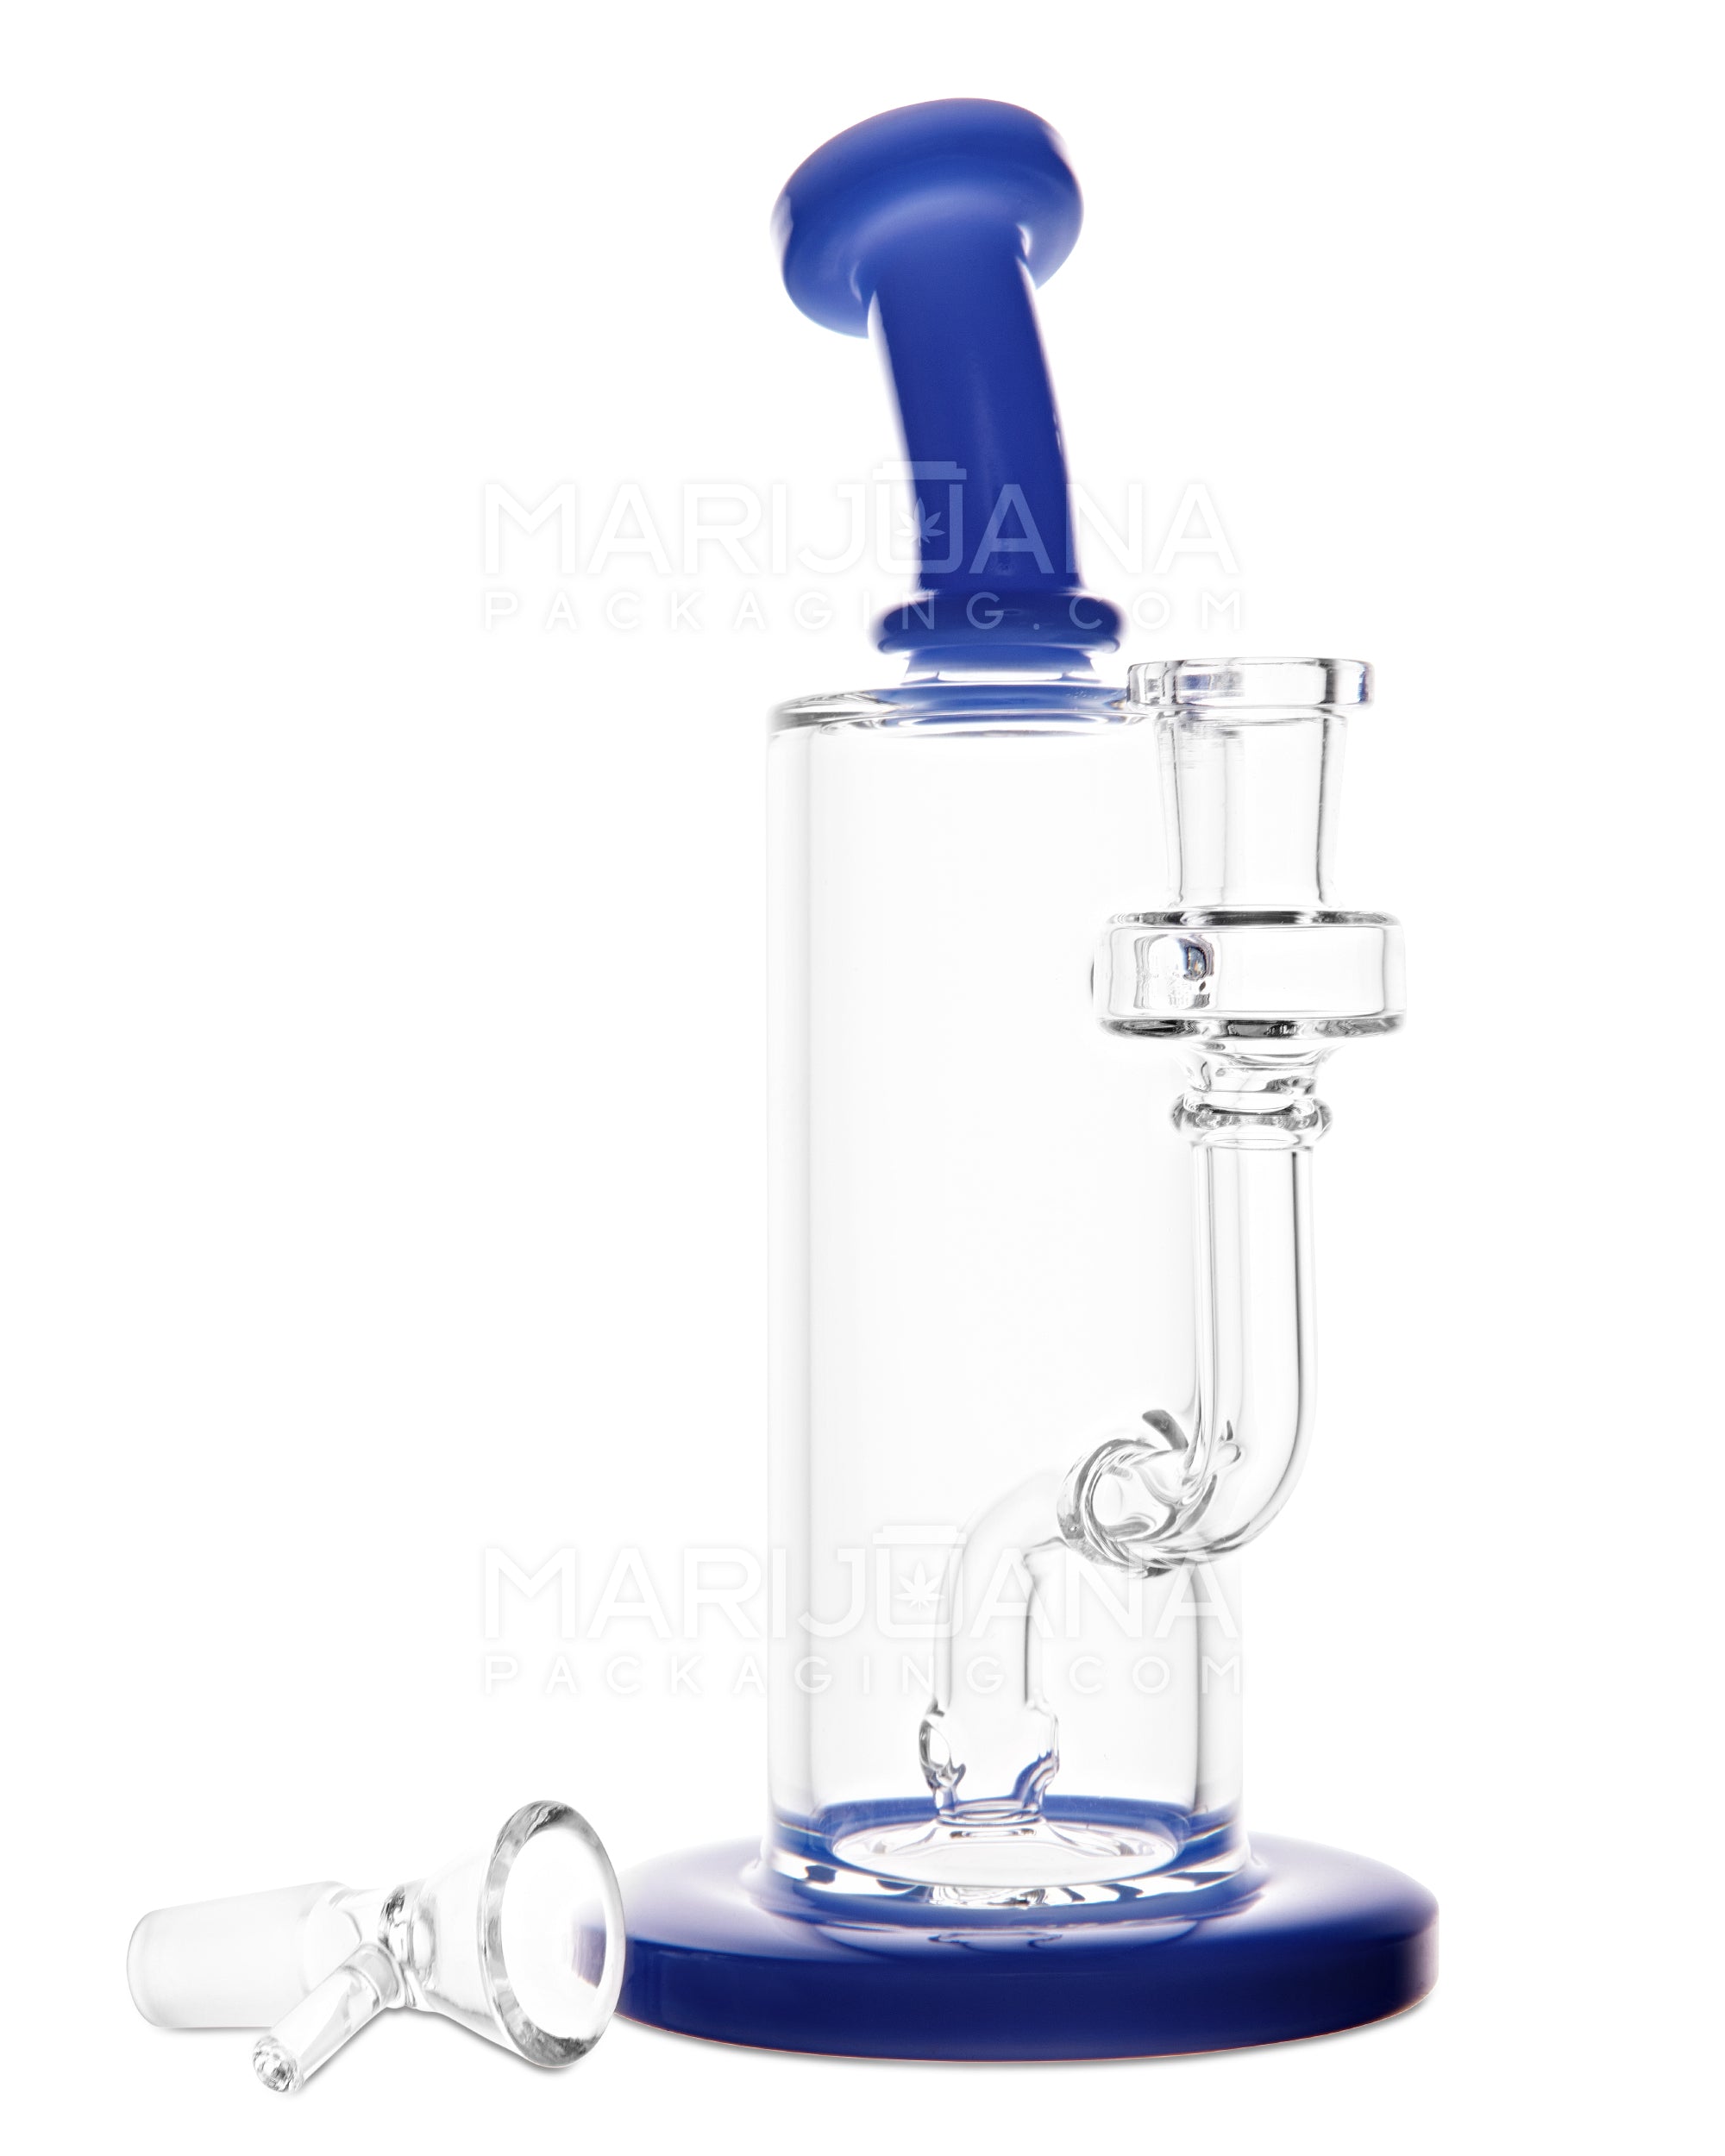 Bent Neck Two Hole Perc Glass Water Pipe w/ Thick Base | 8.5in Tall - 14mm Bowl - Blue - 2